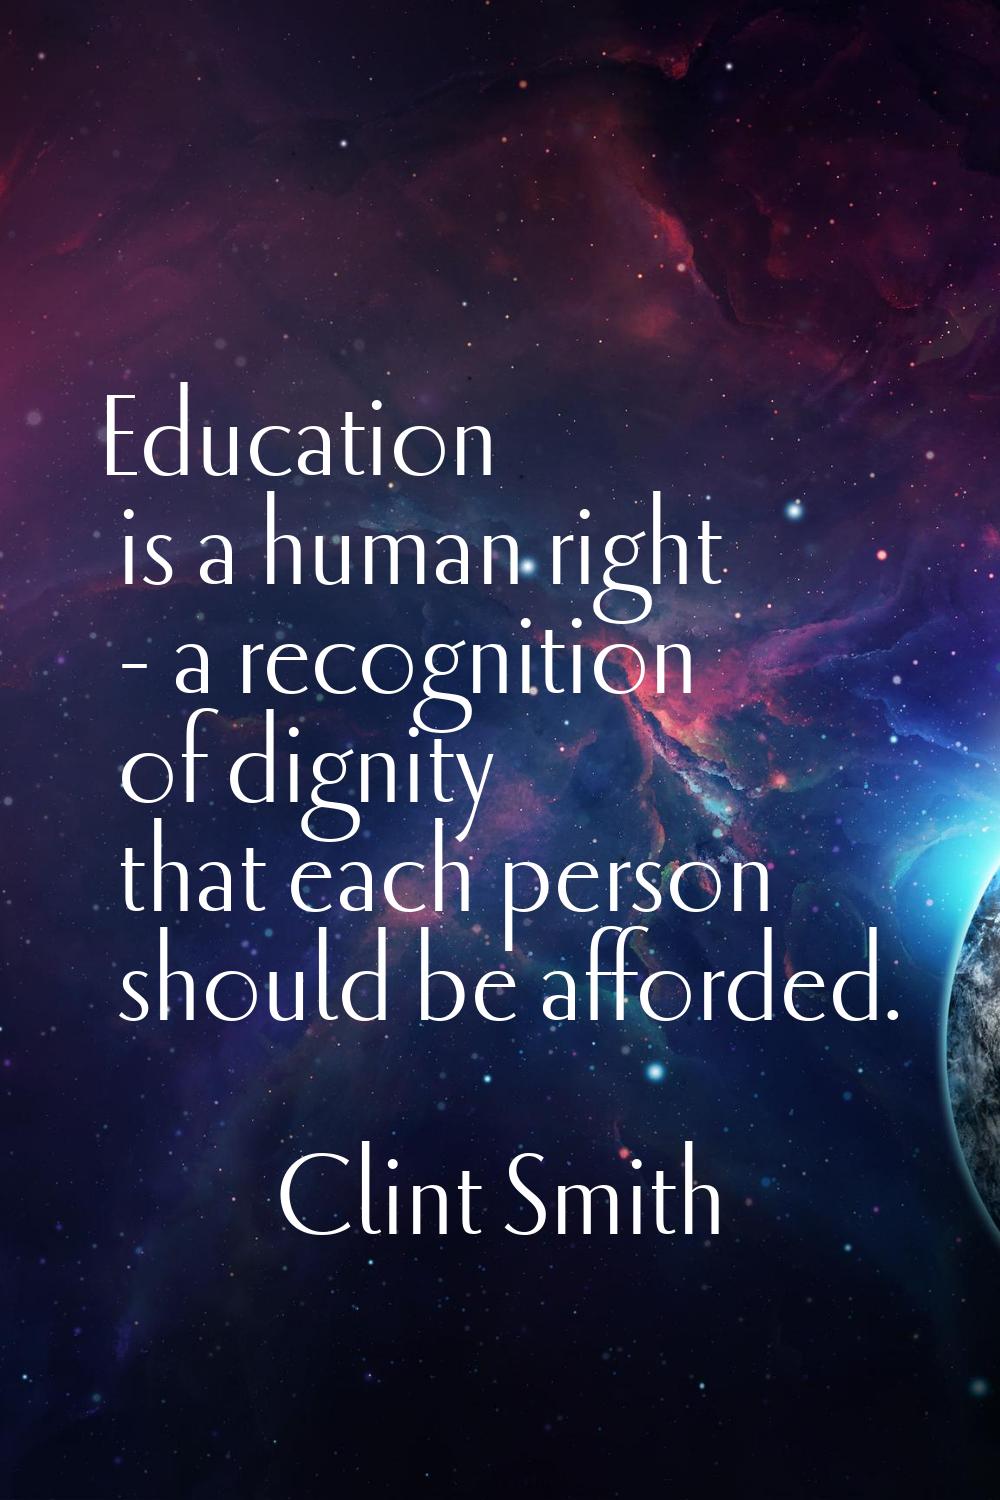 Education is a human right - a recognition of dignity that each person should be afforded.